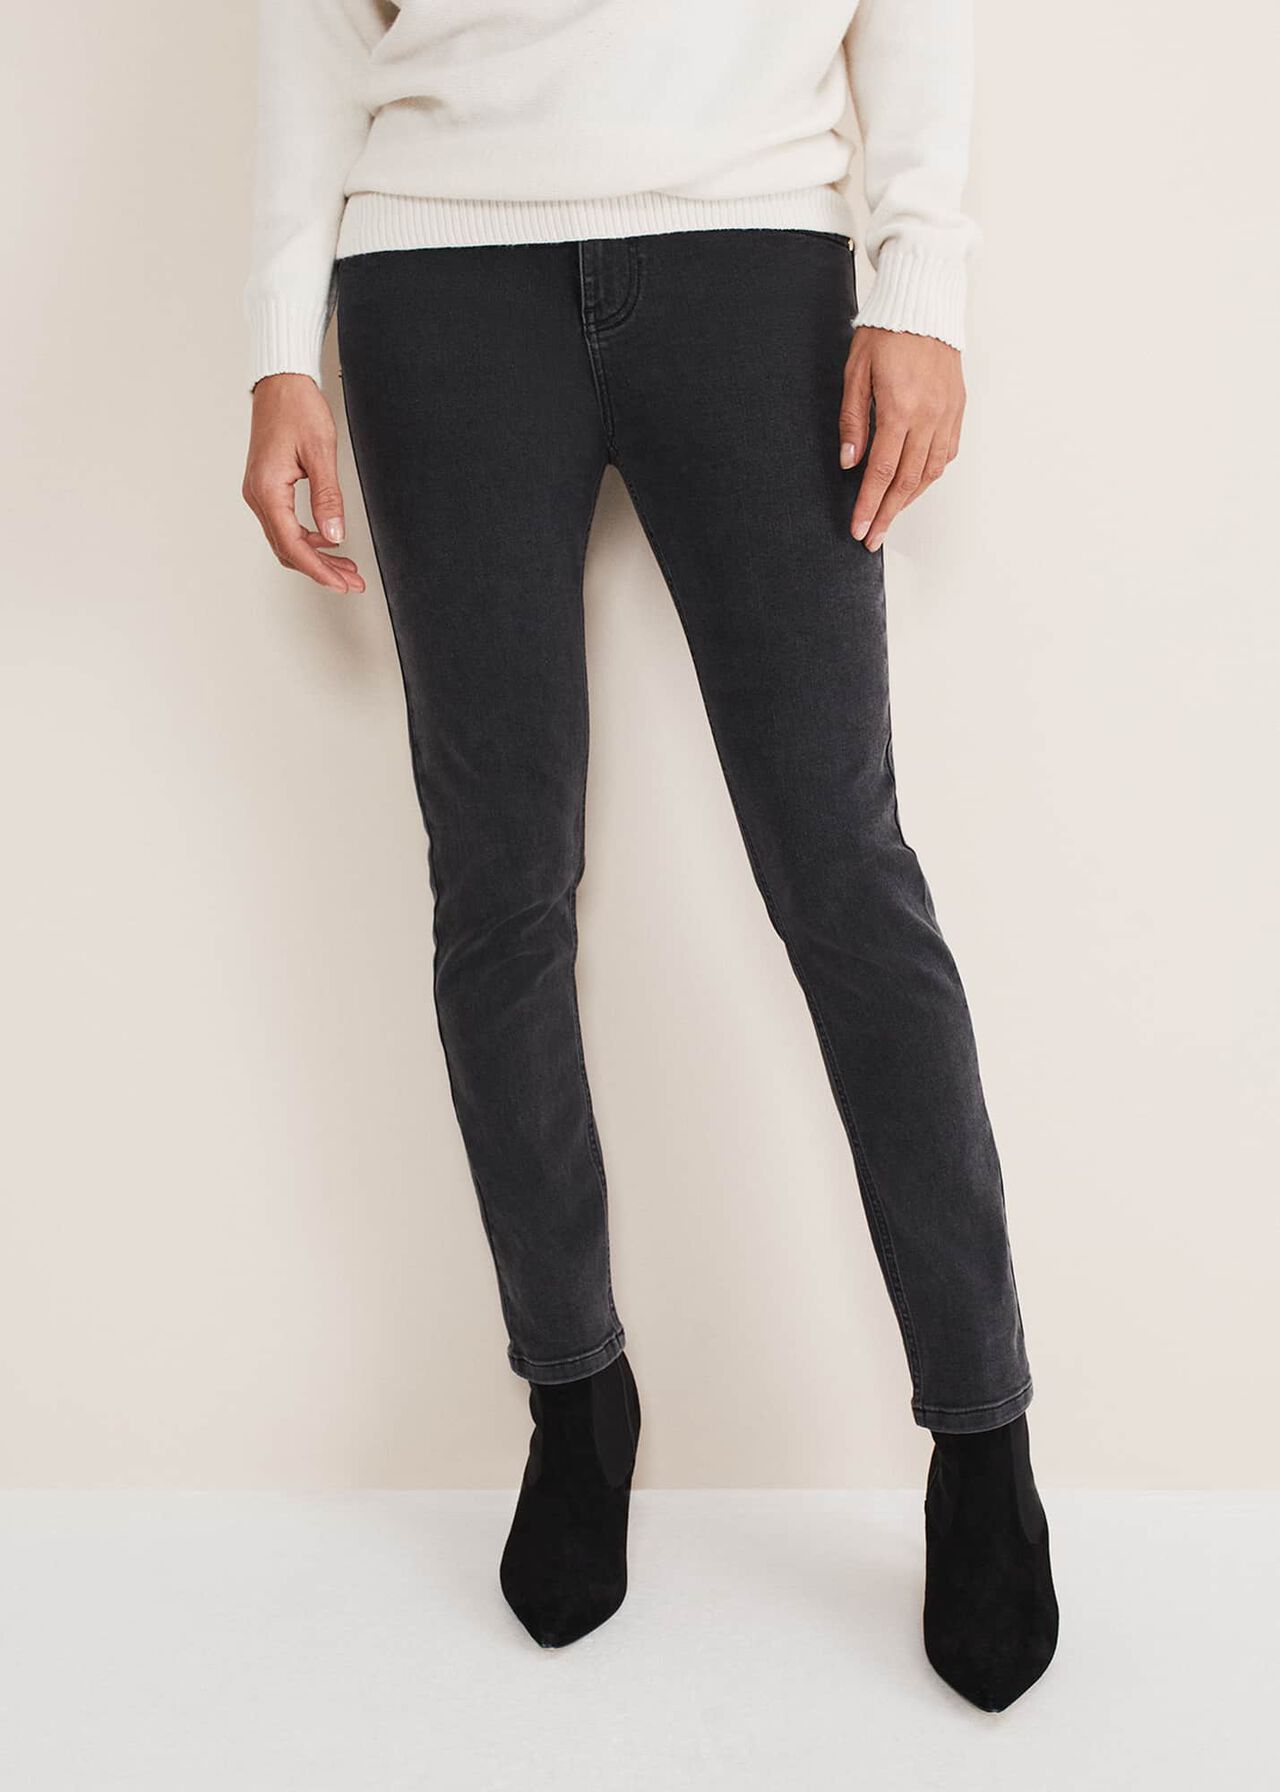 Hailee Topstitch Skinny Jeans | Phase Eight (UK)